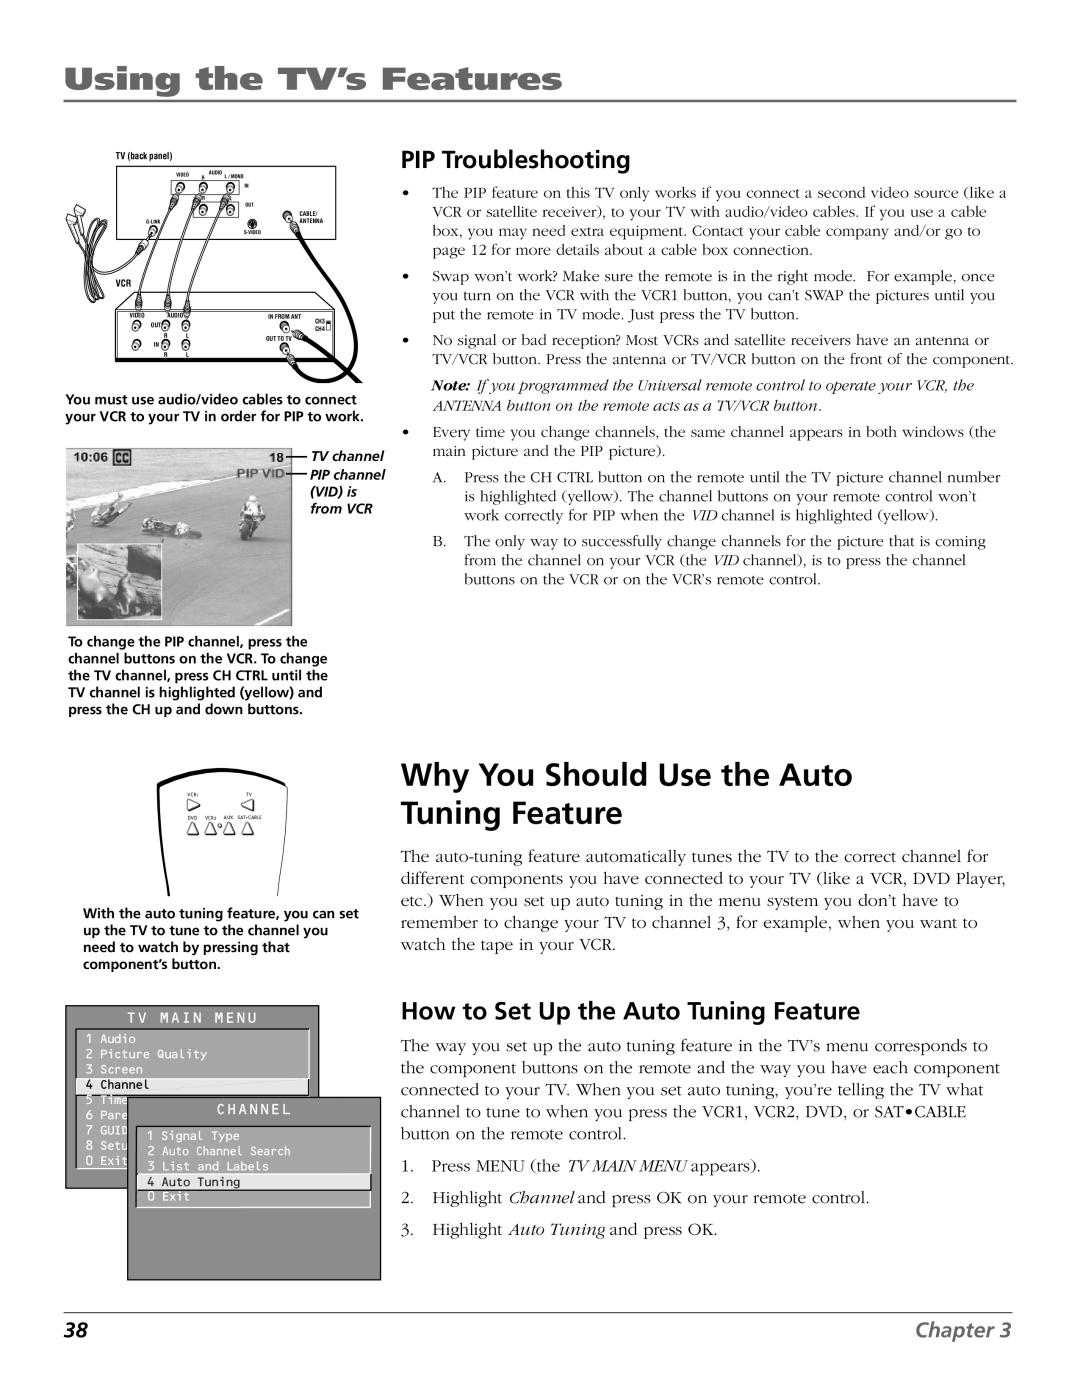 RCA F27669 Why You Should Use the Auto Tuning Feature, PIP Troubleshooting, How to Set Up the Auto Tuning Feature, Chapter 